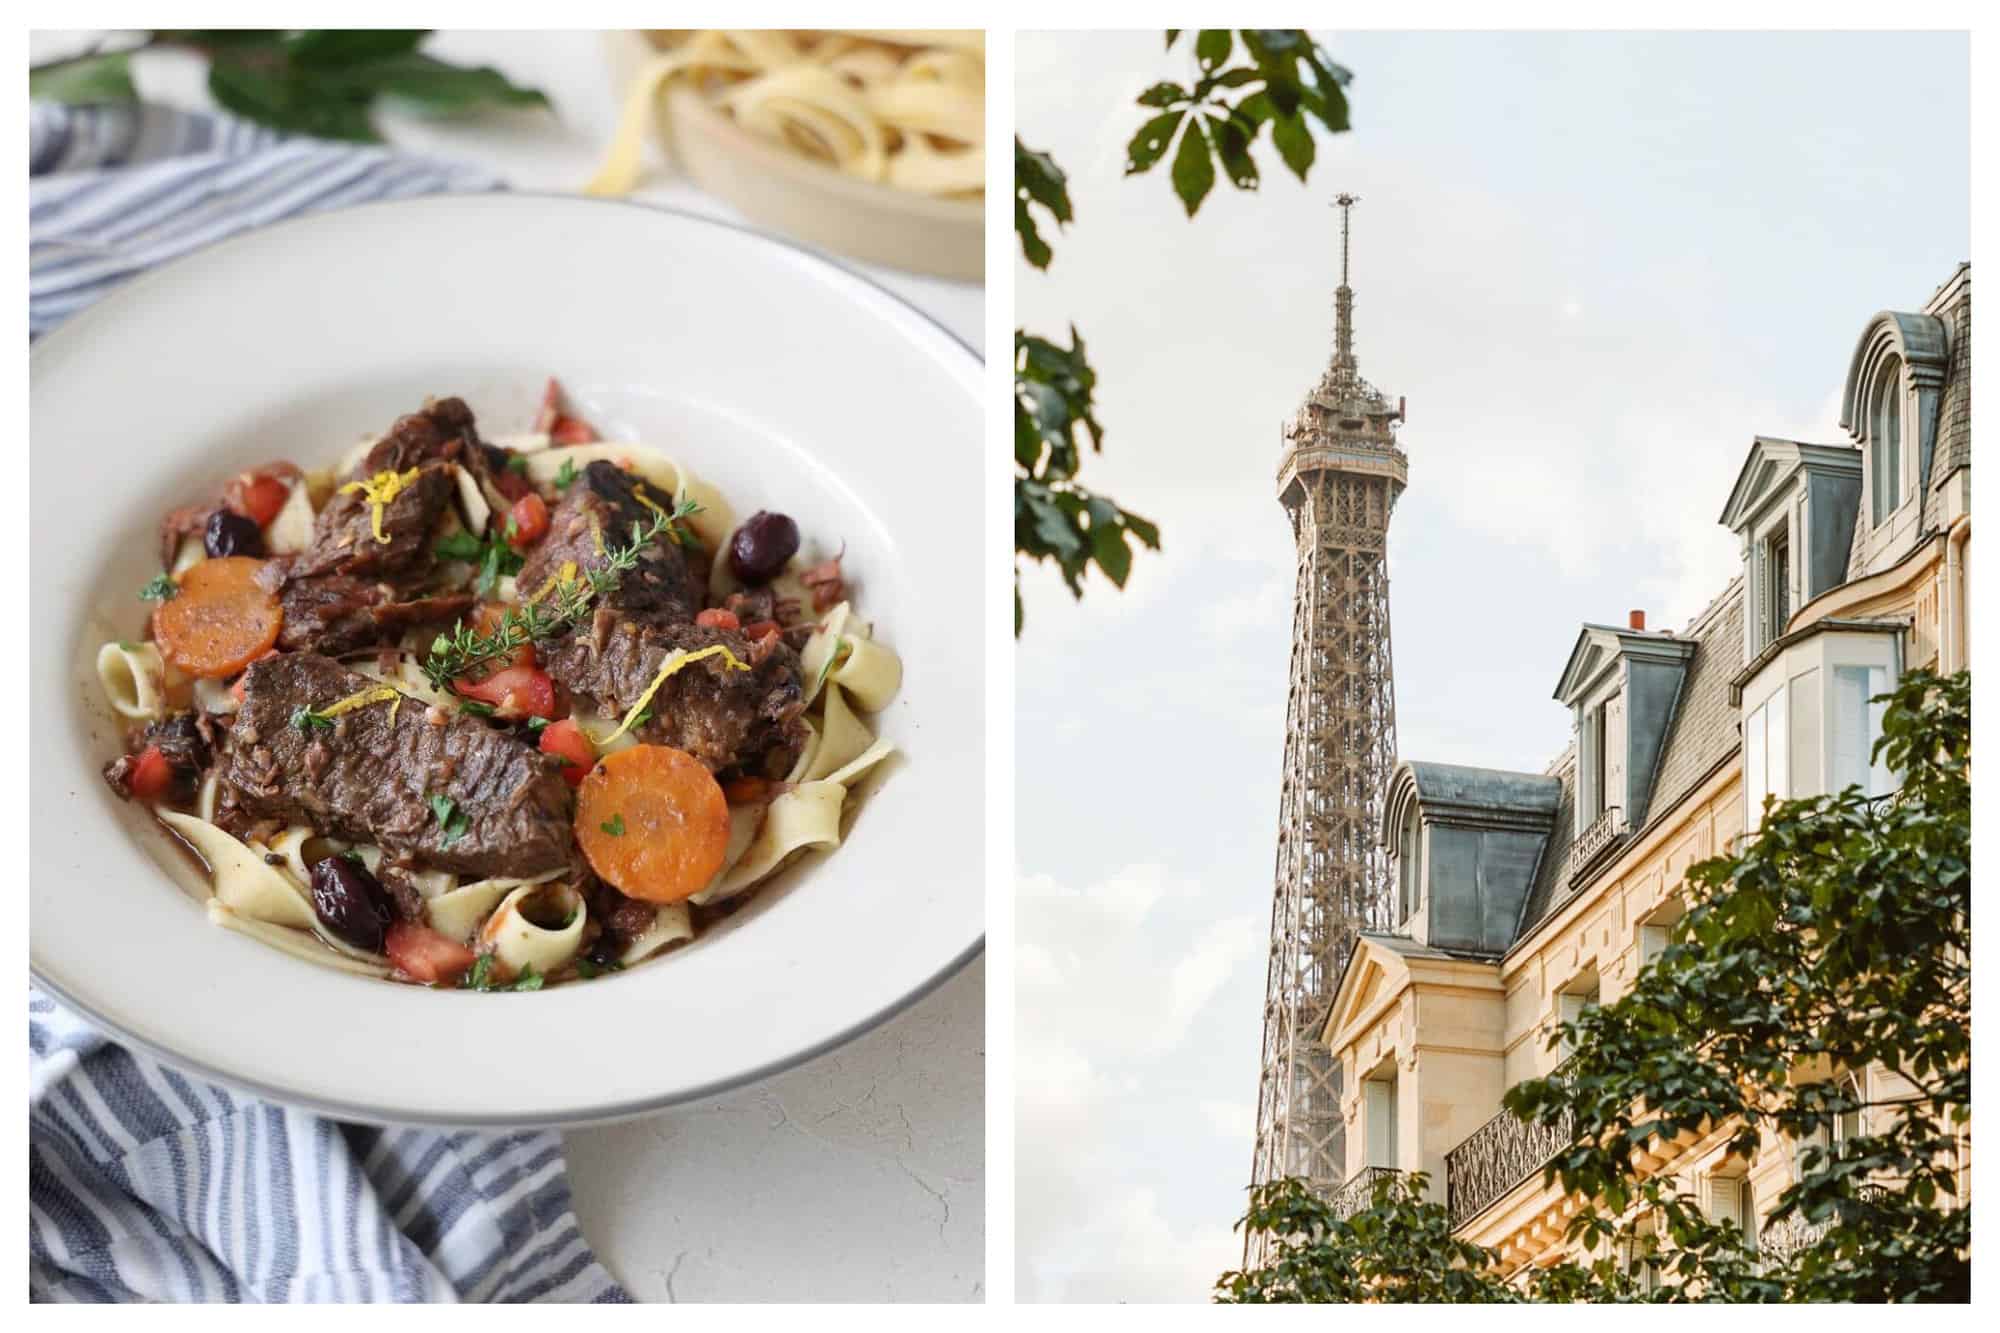 Left- A white bowl of beef and pasta with vegetables. Right- The Eiffel Tower peaks out from behind a Parisian building. 